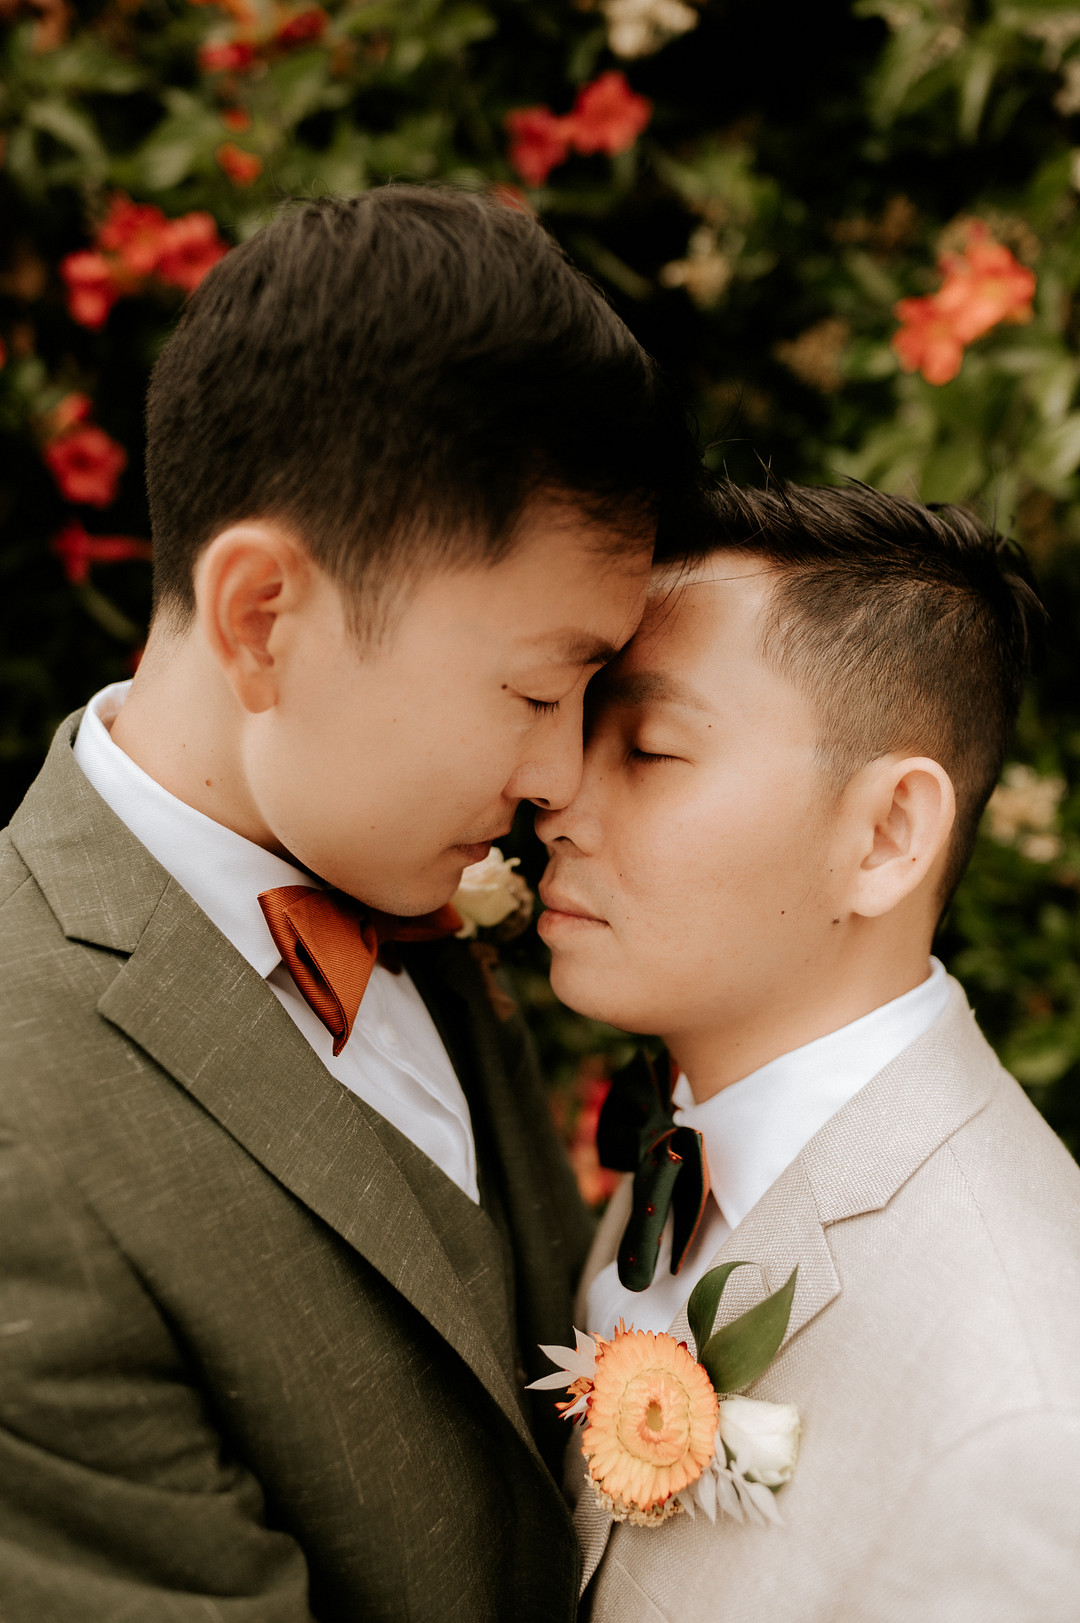 Gay Asian grooms rest their faces together in an intimate moment.